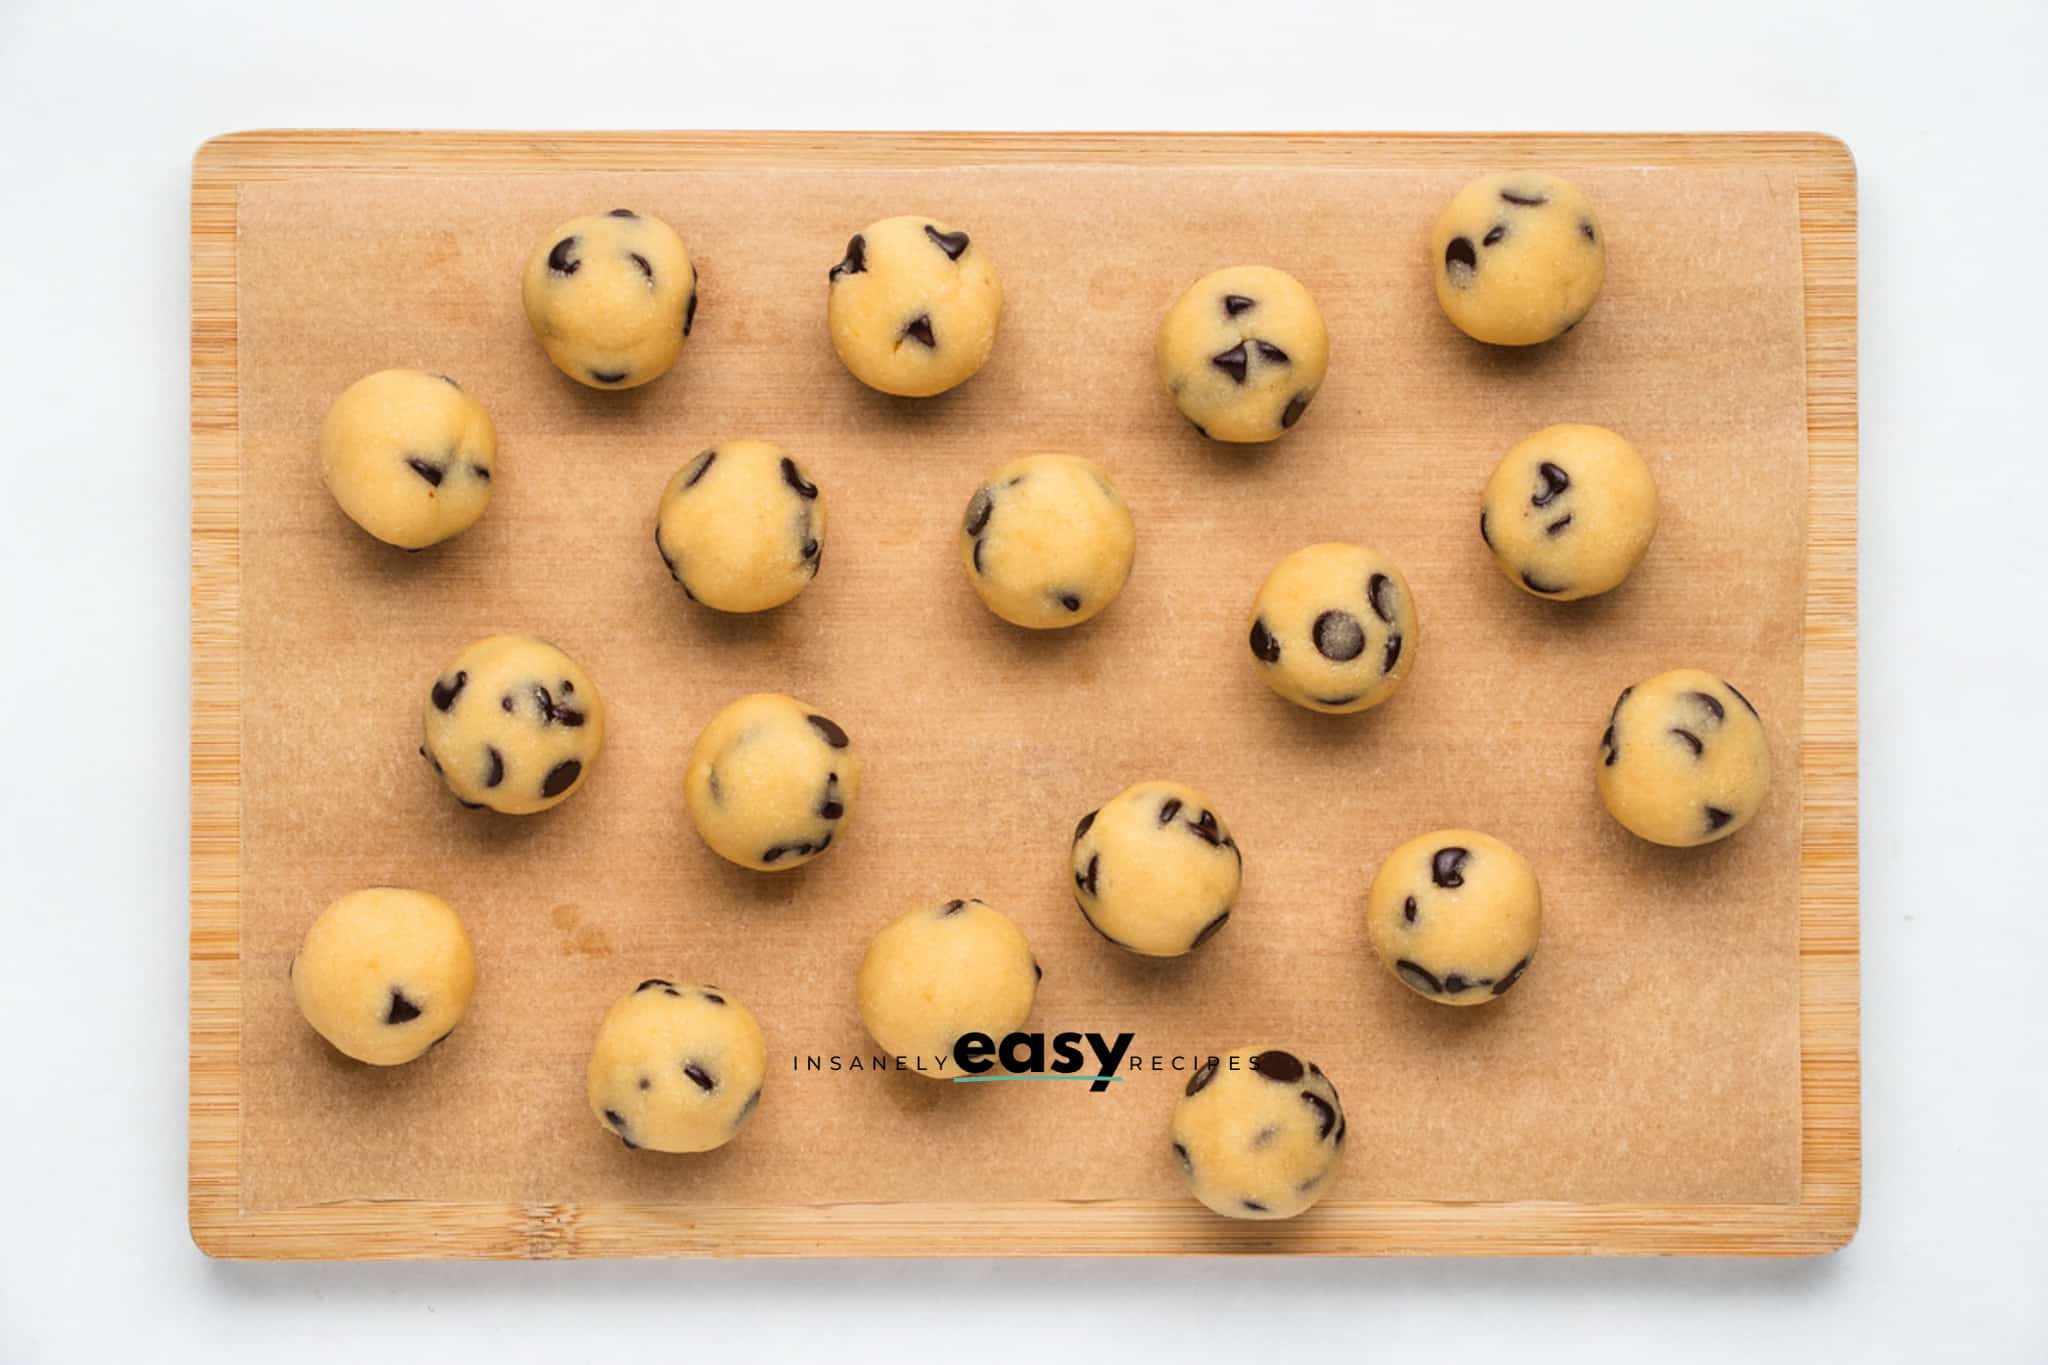 Top view photo of finished No Bake Cookie Dough Bites, on a wooden cutting board and ready to enjoy.